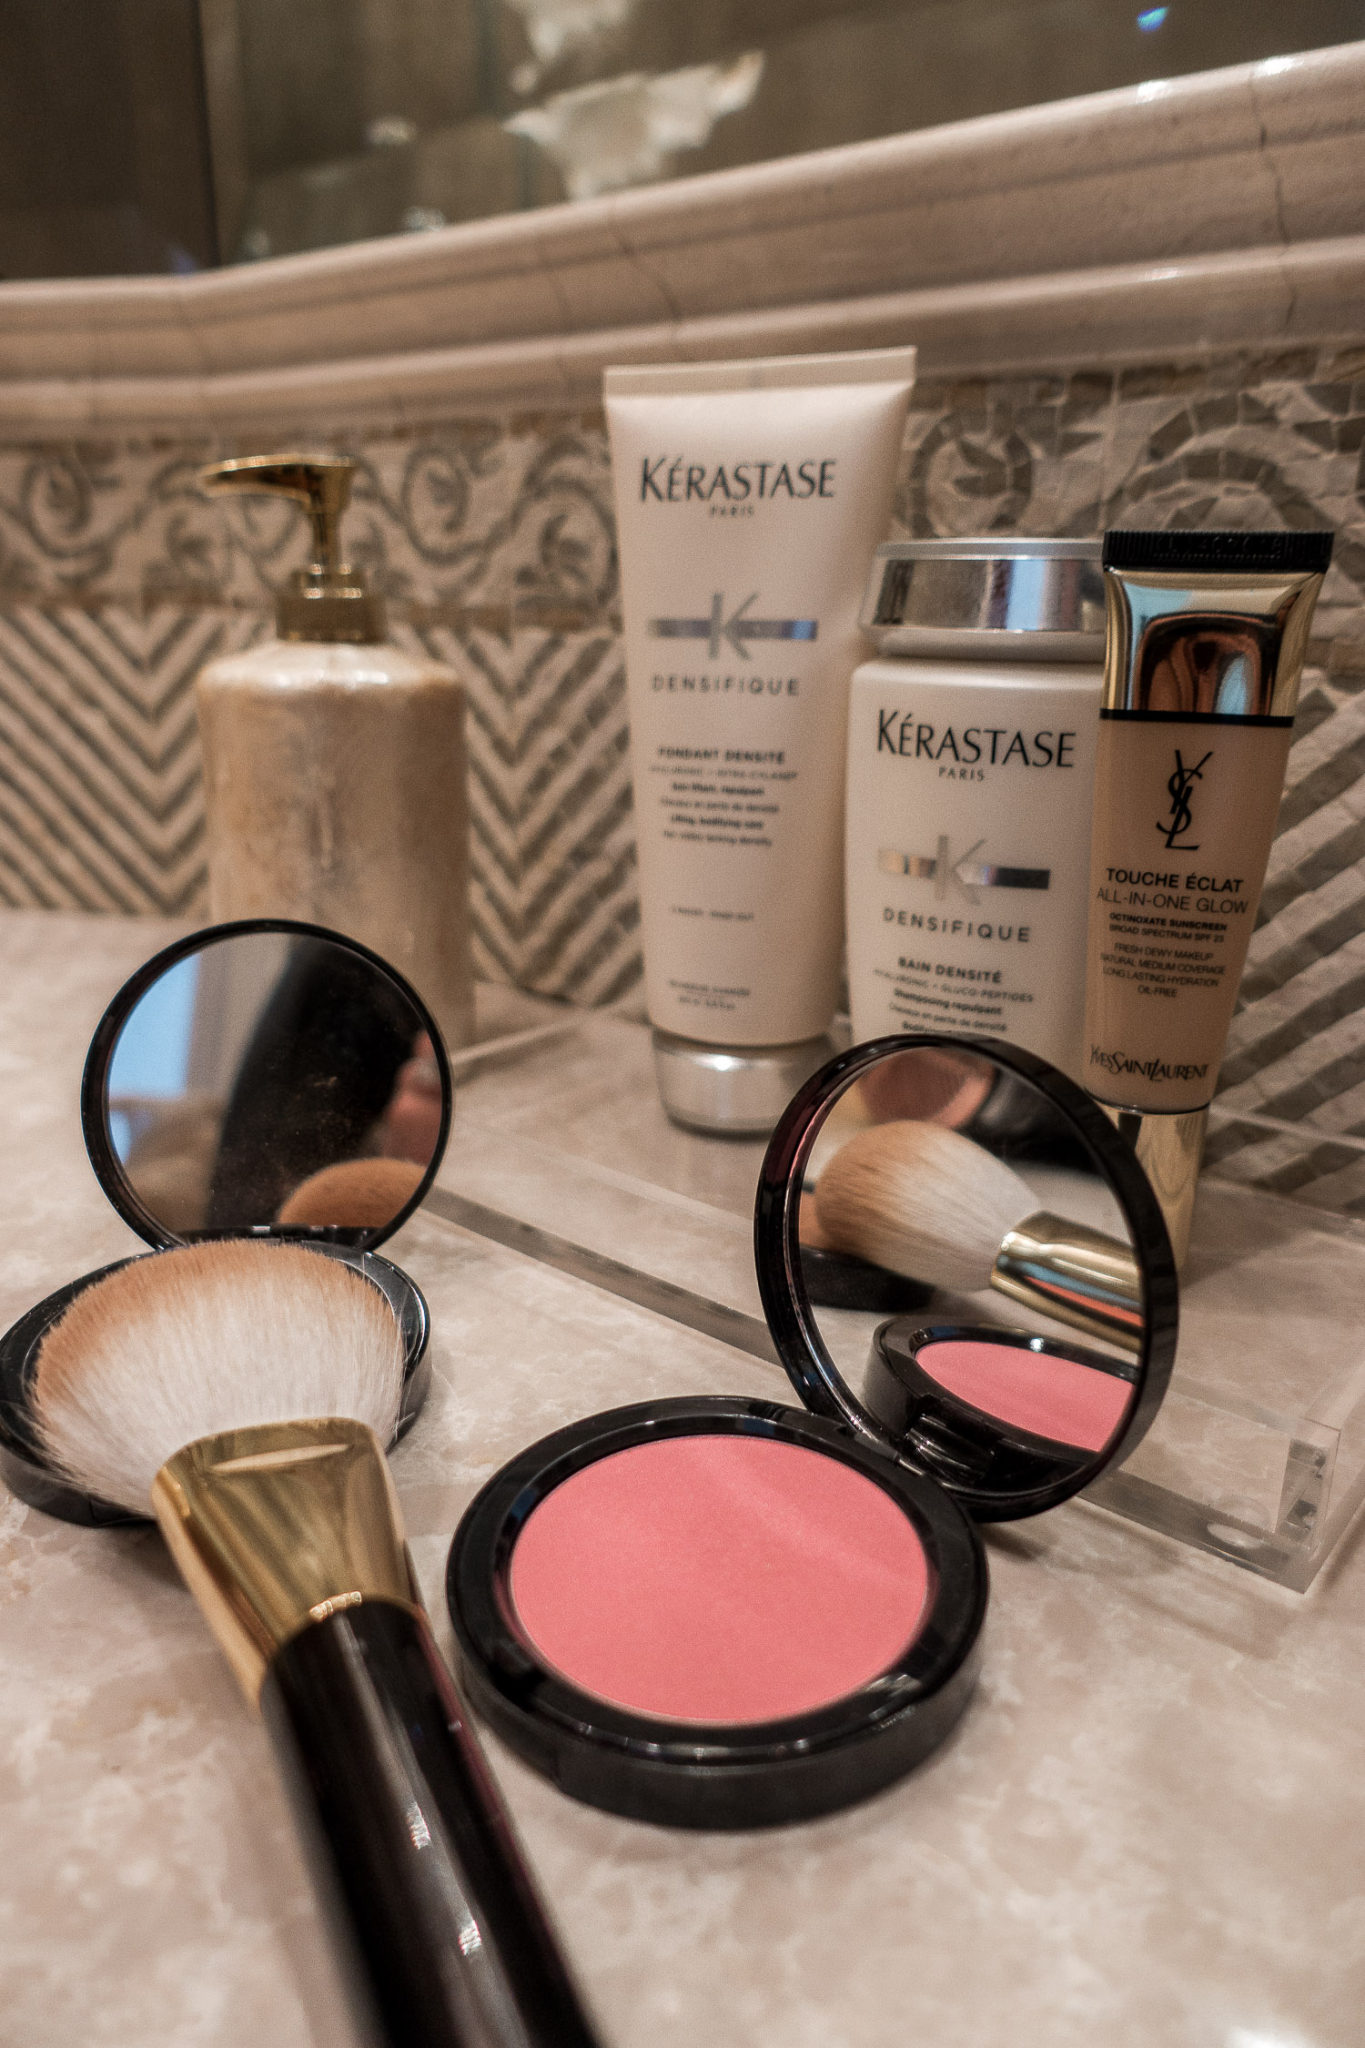 Amanda of A Glam Lifestyle shares her July beauty faves, including the YSL touche eclat all in one glow, Bobbi Brown bali brown bronzer and the Tom Ford bronzer brush